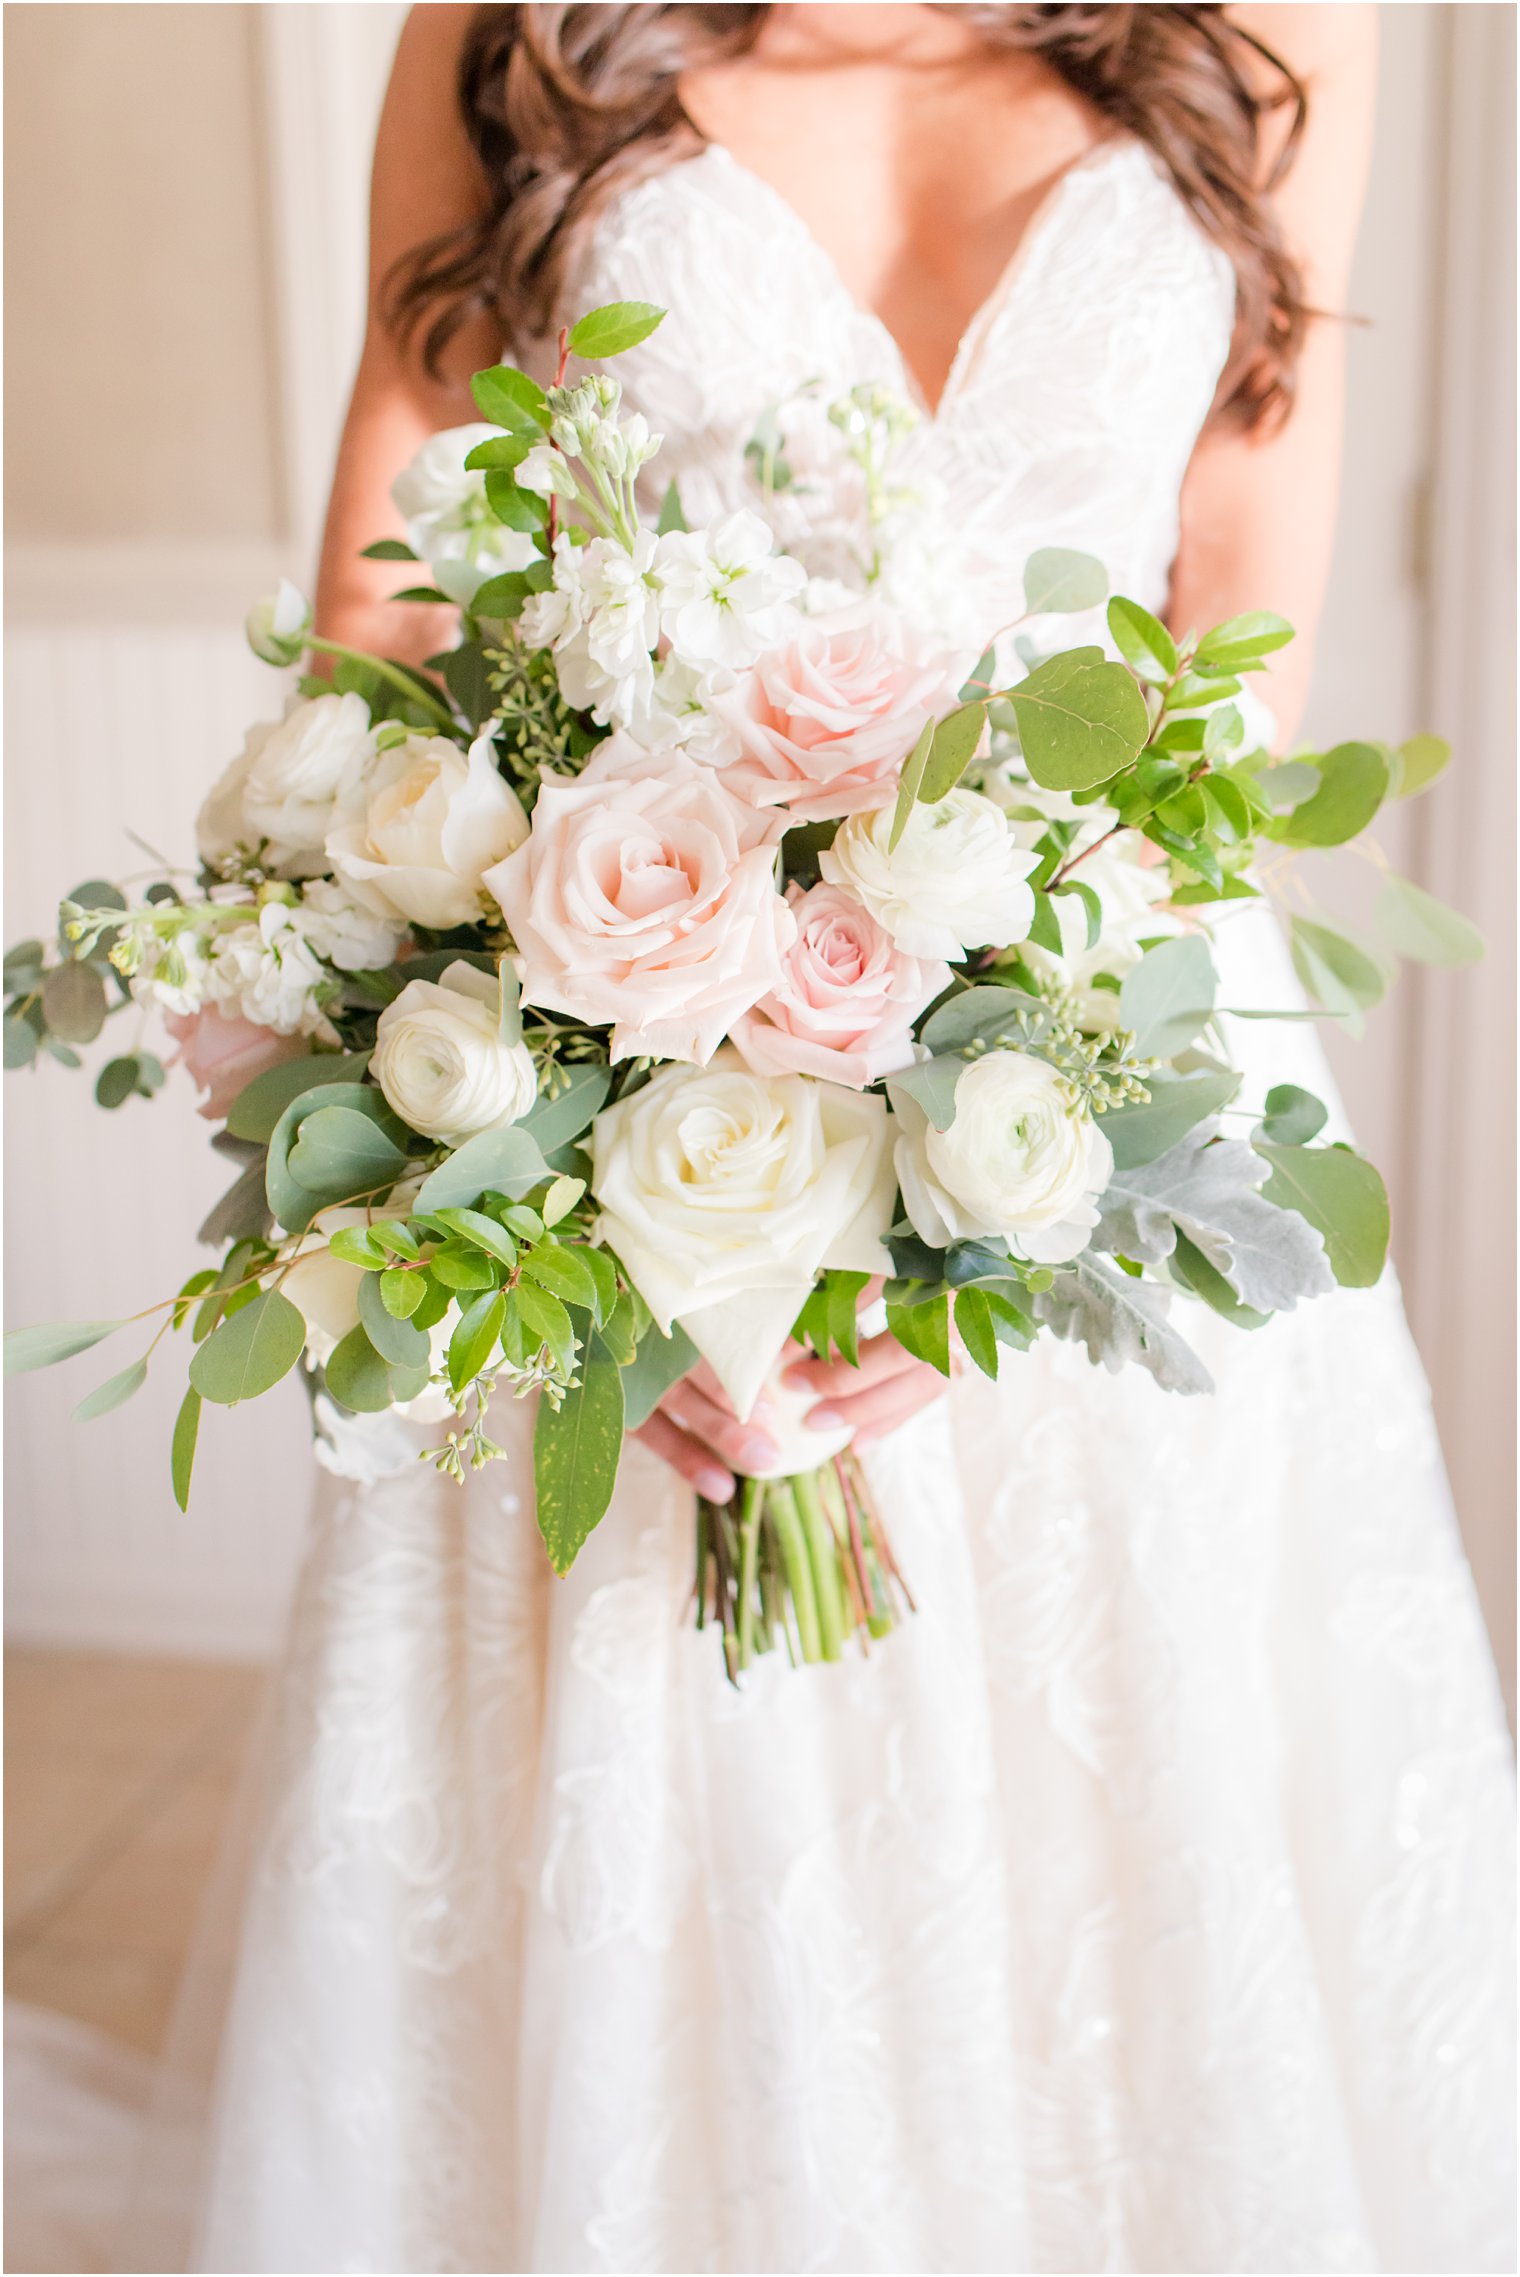 bridal bouquet by Bespoke Floral photographed by Idalia Photography